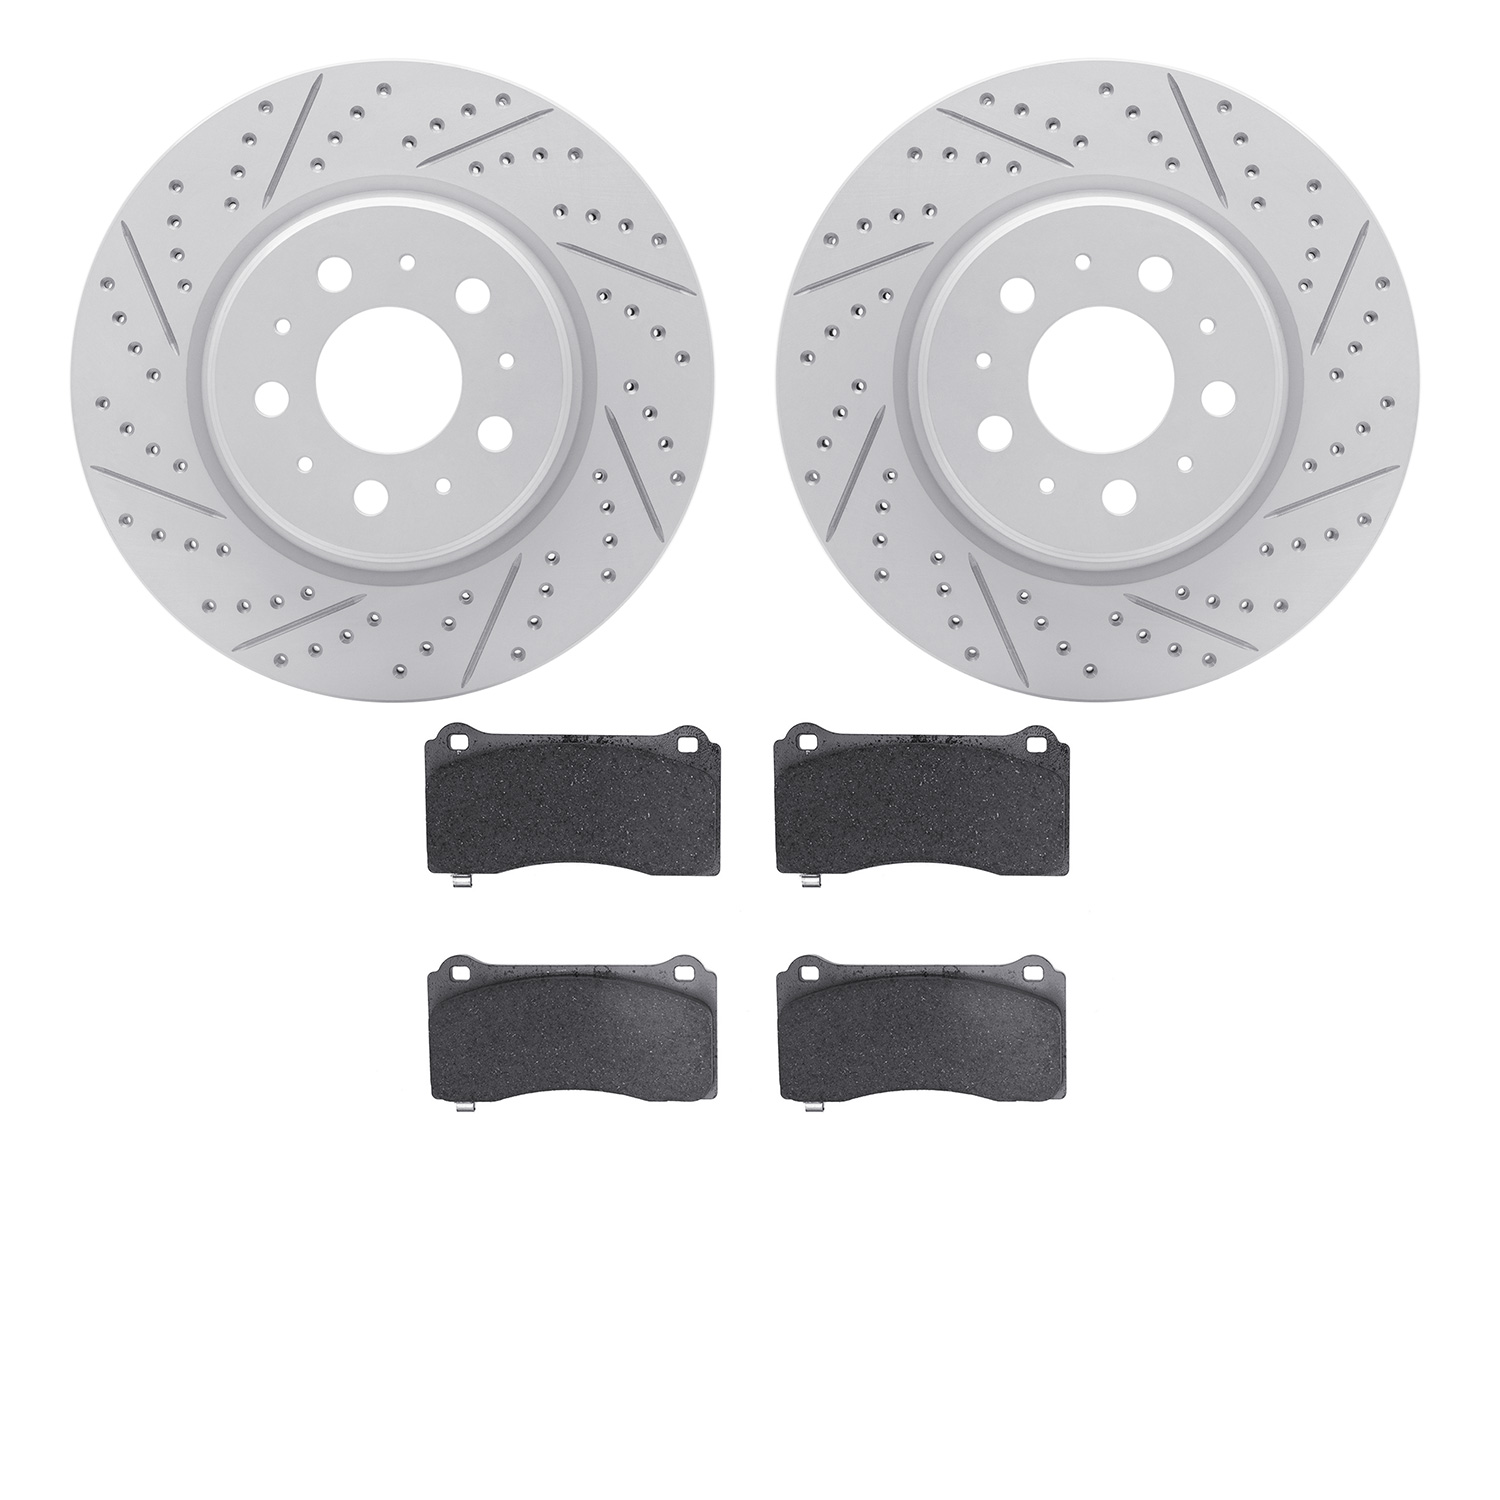 2502-26006 Geoperformance Drilled/Slotted Rotors w/5000 Advanced Brake Pads Kit, Fits Select Tesla, Position: Front